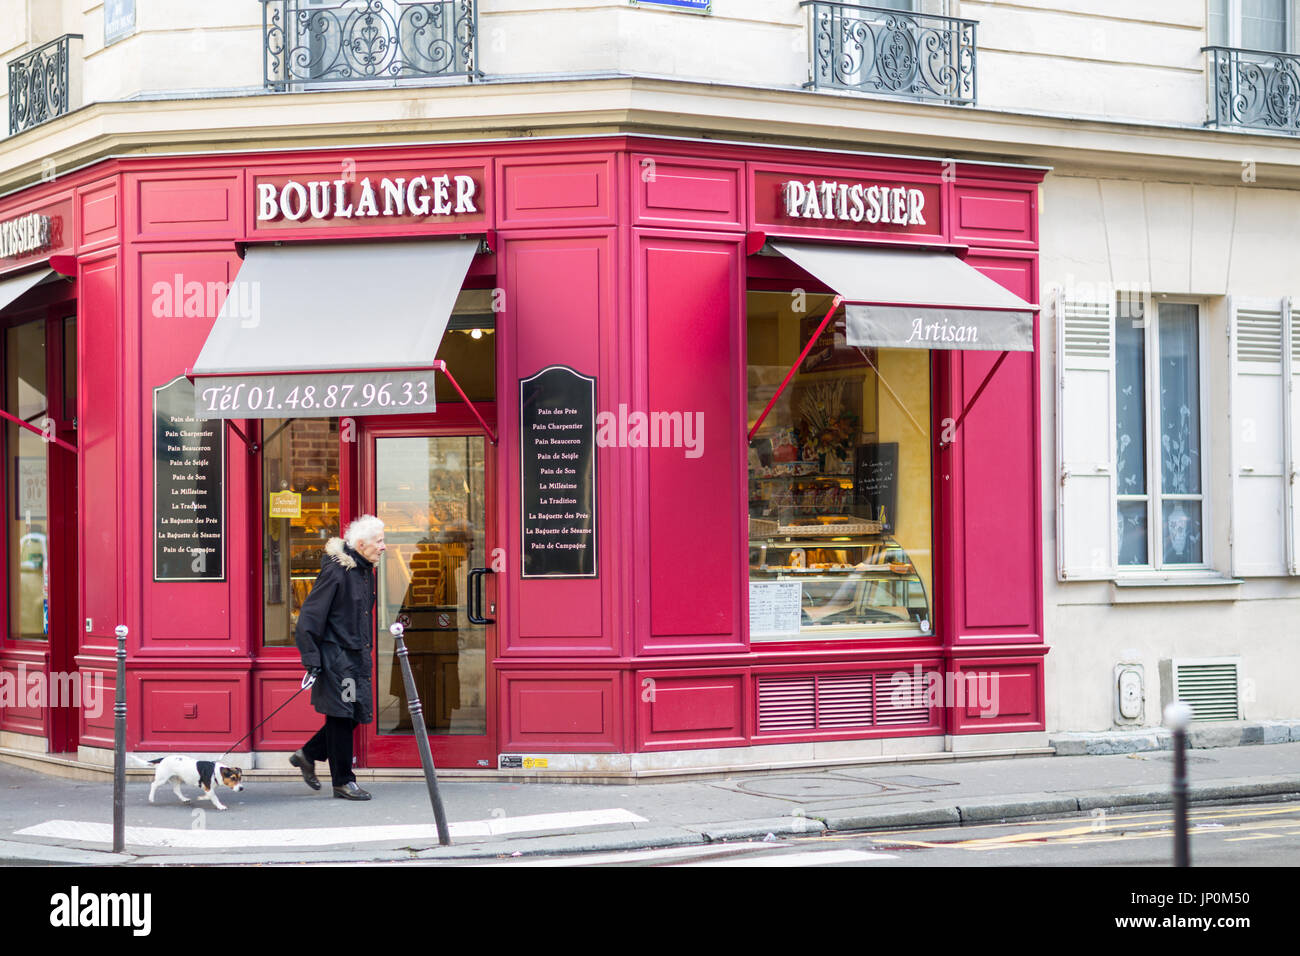 Paris, France - March 2, 2016: Woman walks her dog past red bakery and pastry shop on the corner of rue du Petit Musc and rue de la Cerisaie in the Marais, Paris. Stock Photo